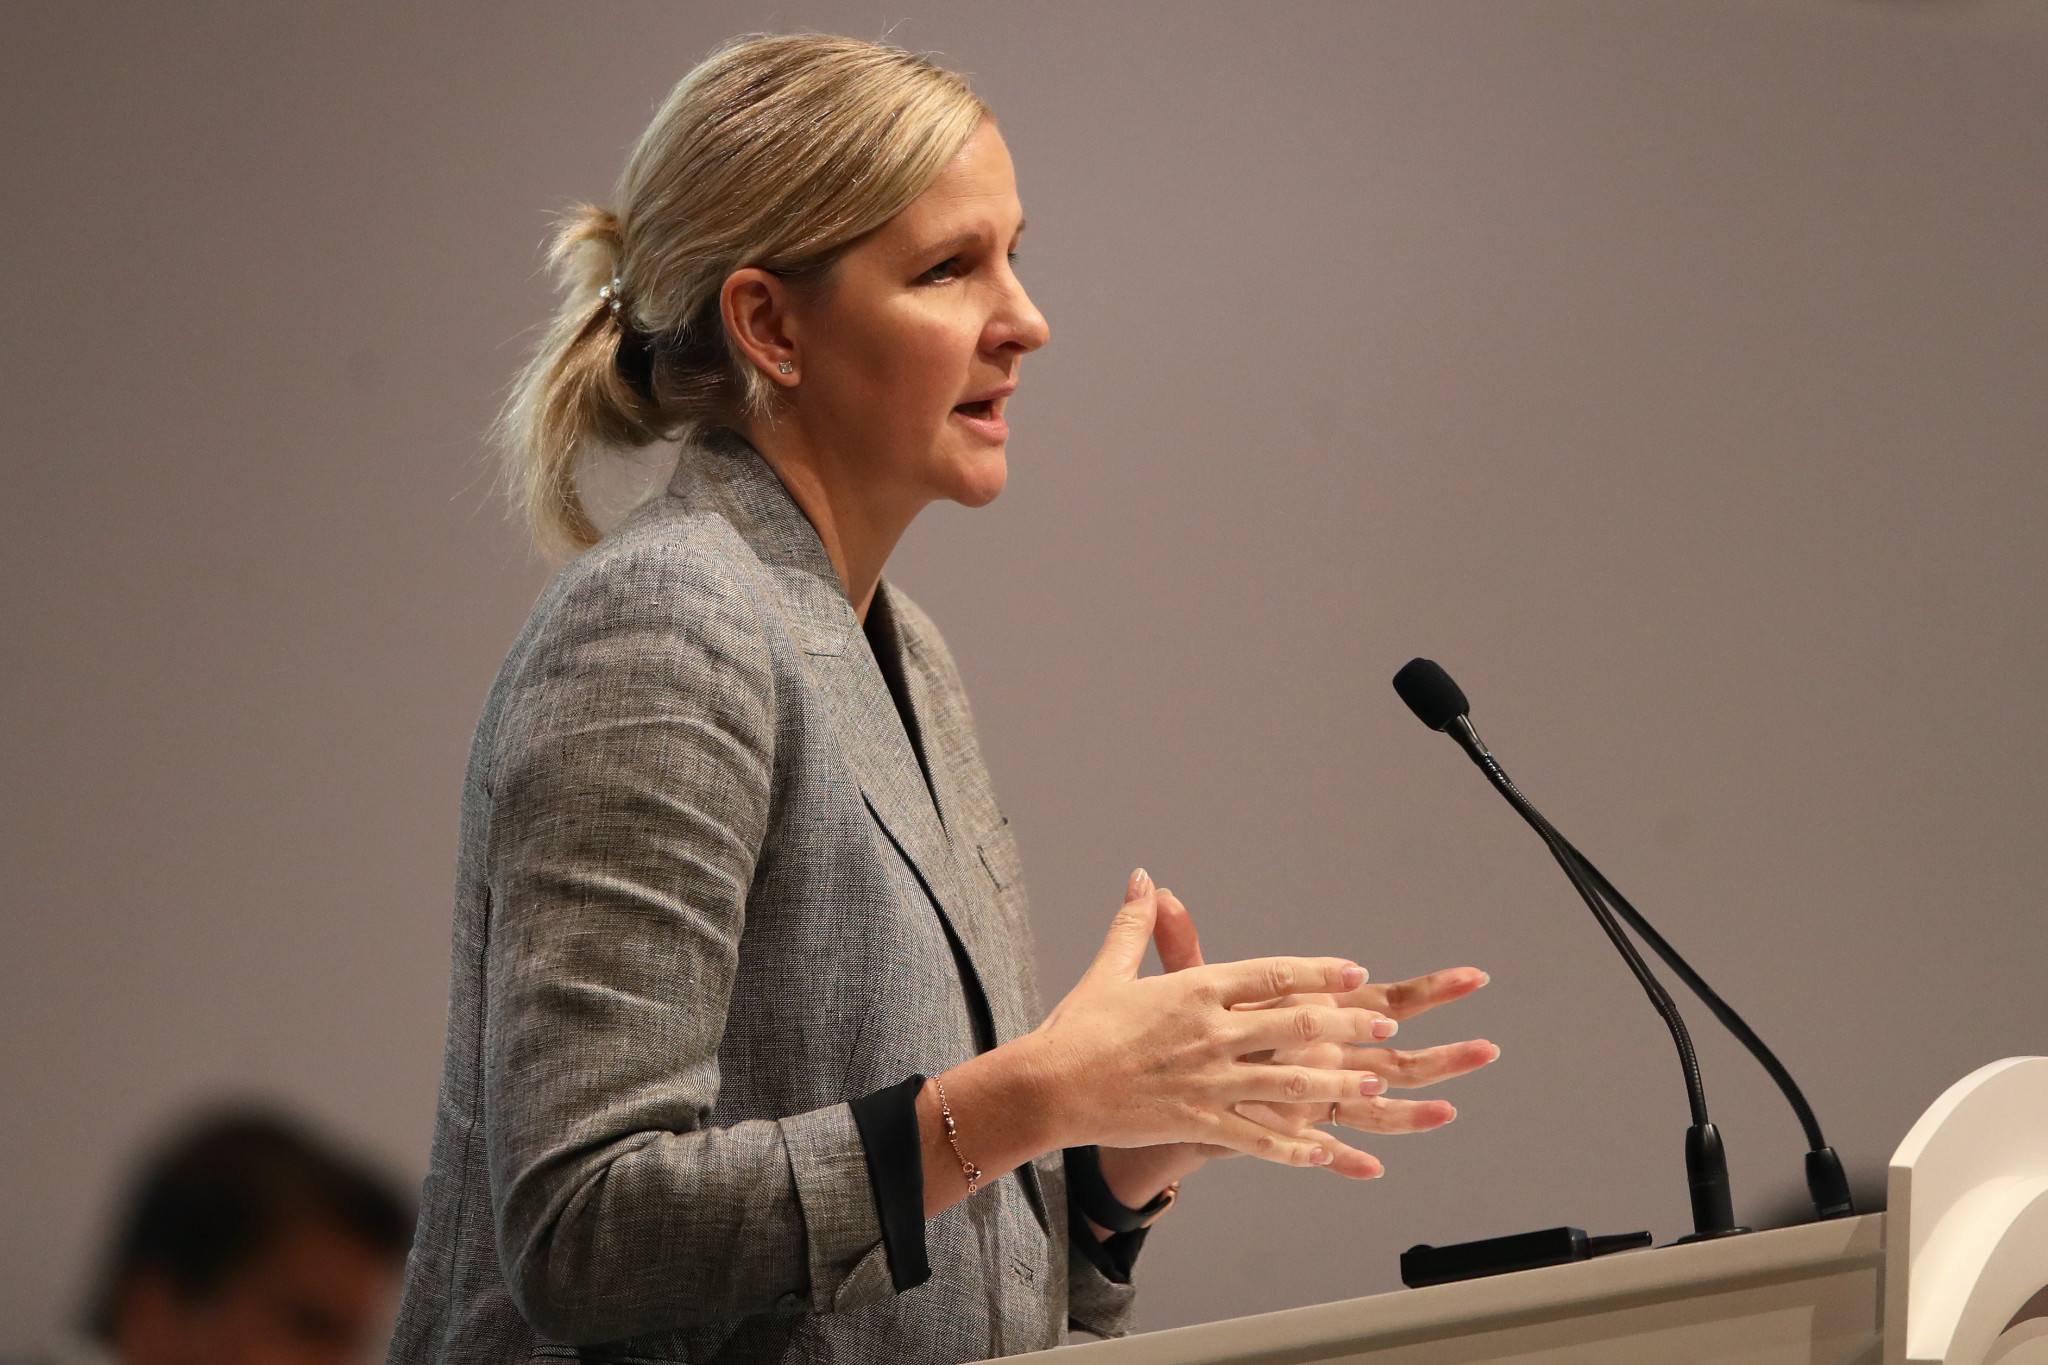 Kirsty Coventry provided an update on preparations for the Summer Youth Olympic Games in Dakar, now taking place in 2026 ©Getty Images